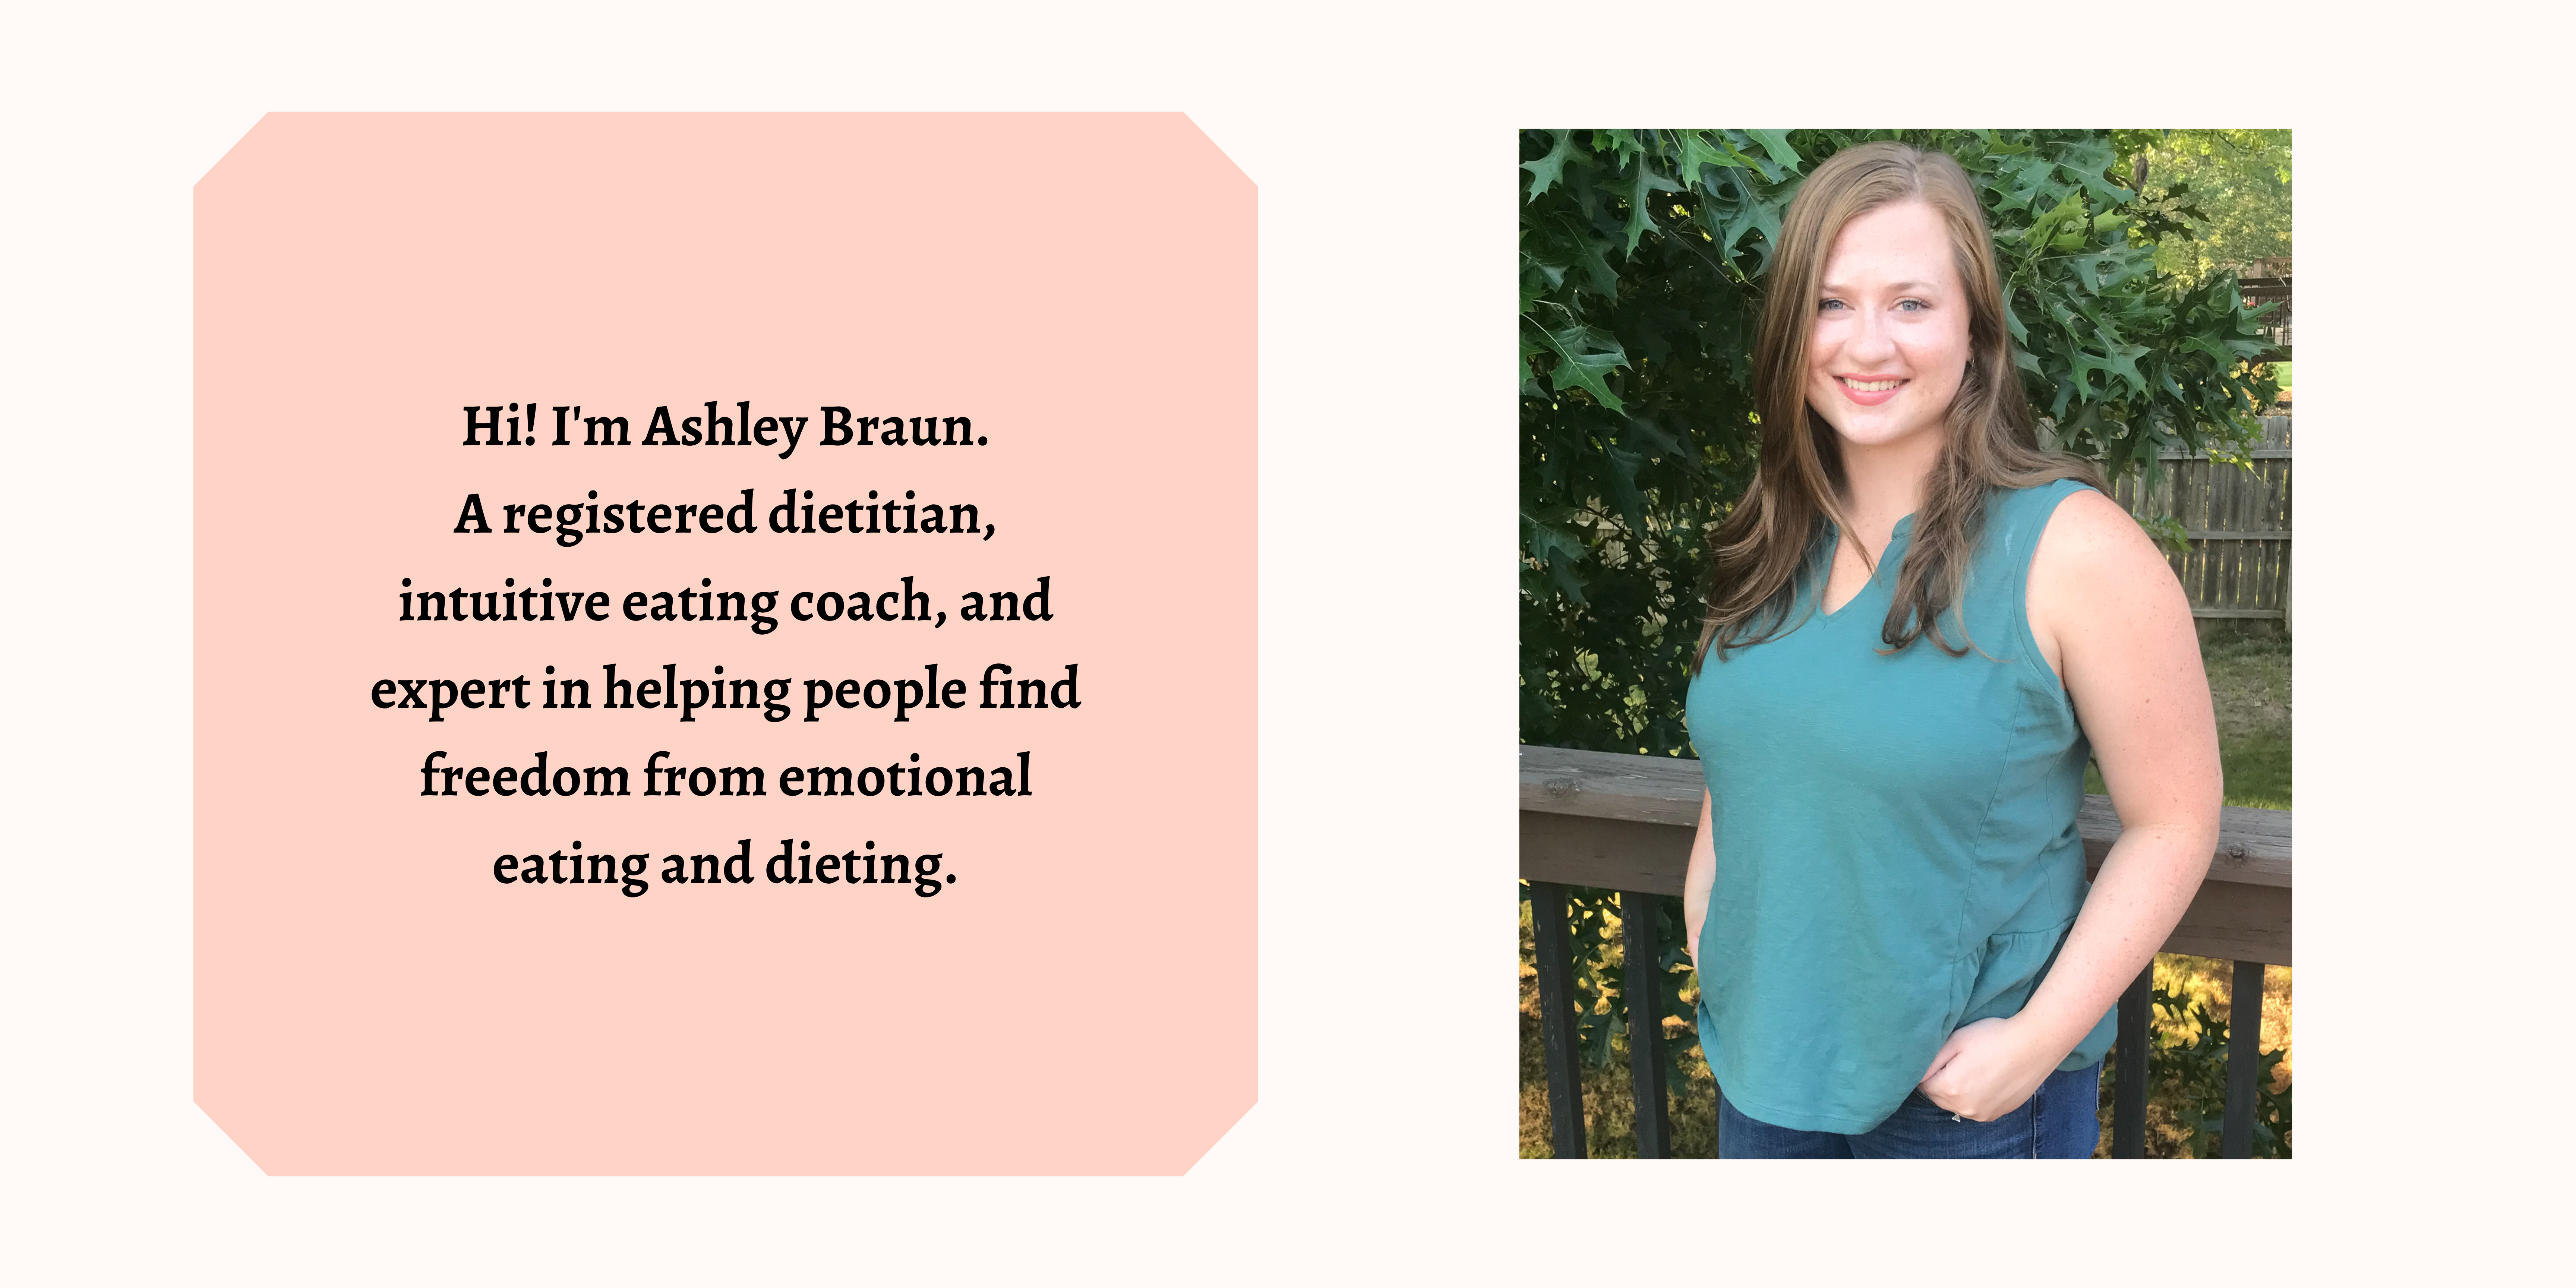 Photo of owner of Food Peace Nutrition and text that says "Hi! I'm Ashley Braun. A registered dietitian, intuitive eating coach, and expert in helping people find freedom from emotional eating and dieting"